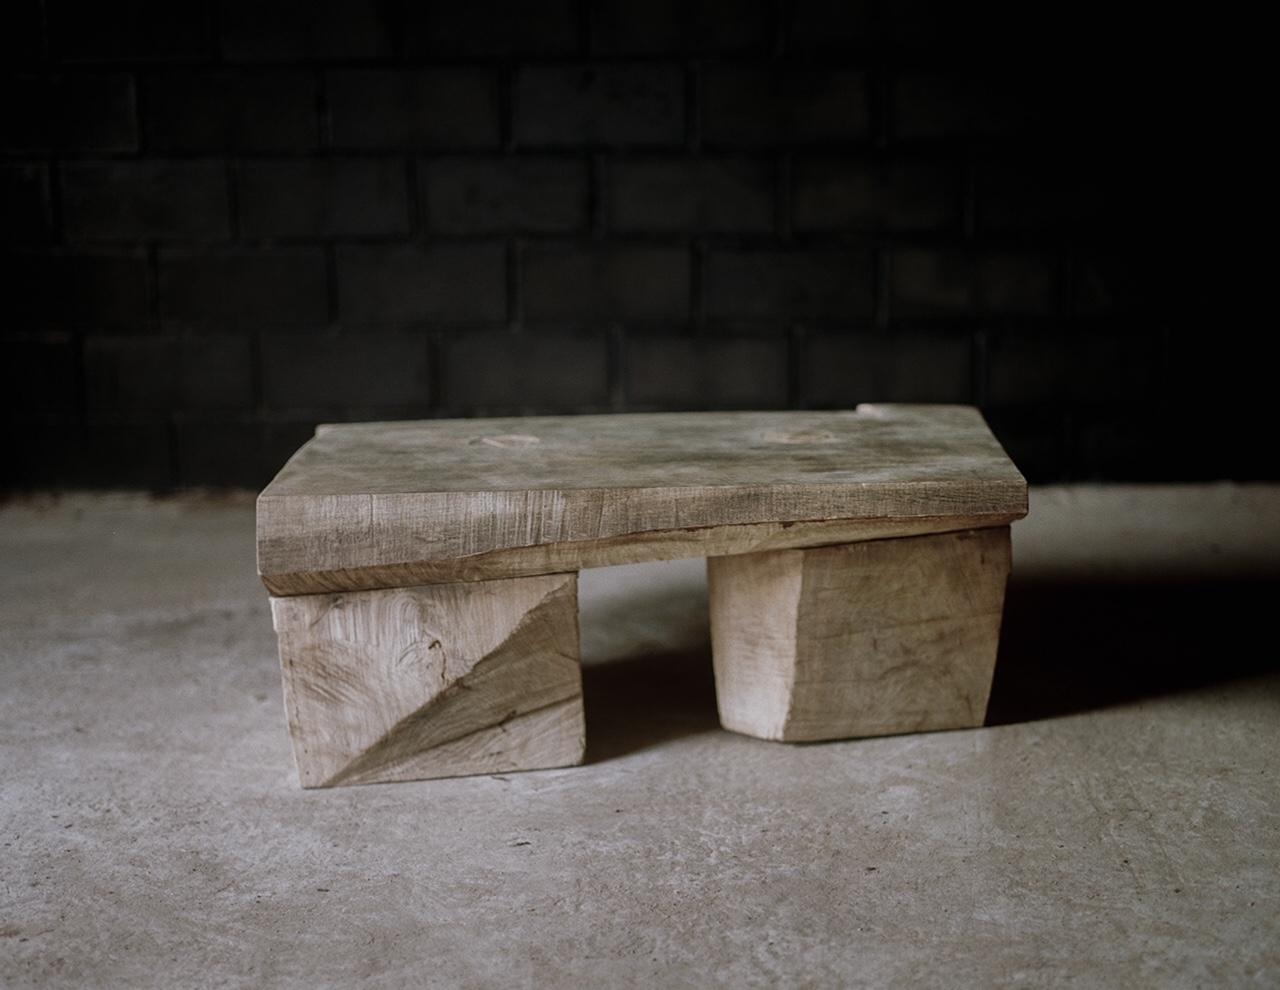 Original sculpted low table in oakwood, Denis Milovanov

Title: The Table

Material: Solid oakwood sculpted with chain saw

Measures: 1200 x 700 x 350 mm

Denis Milovanov creates art objects, landscape pieces and designed furniture of solid